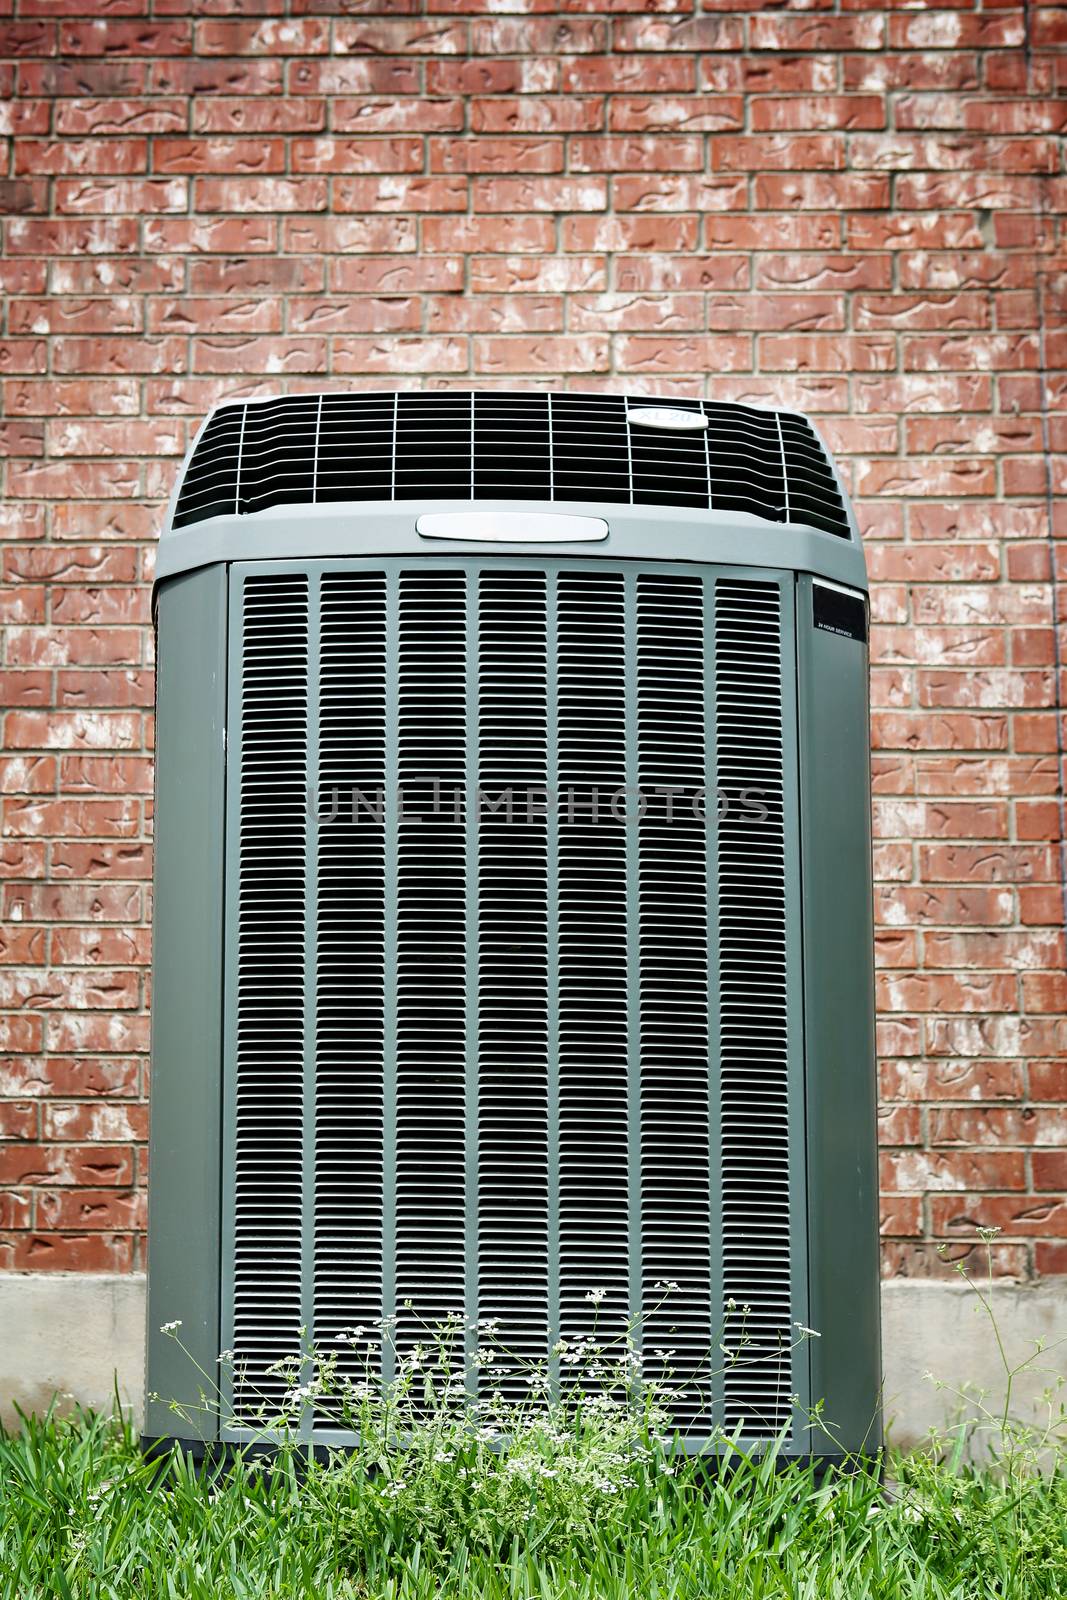 High efficiency modern AC-heater unit, energy save solution in front of brick wall